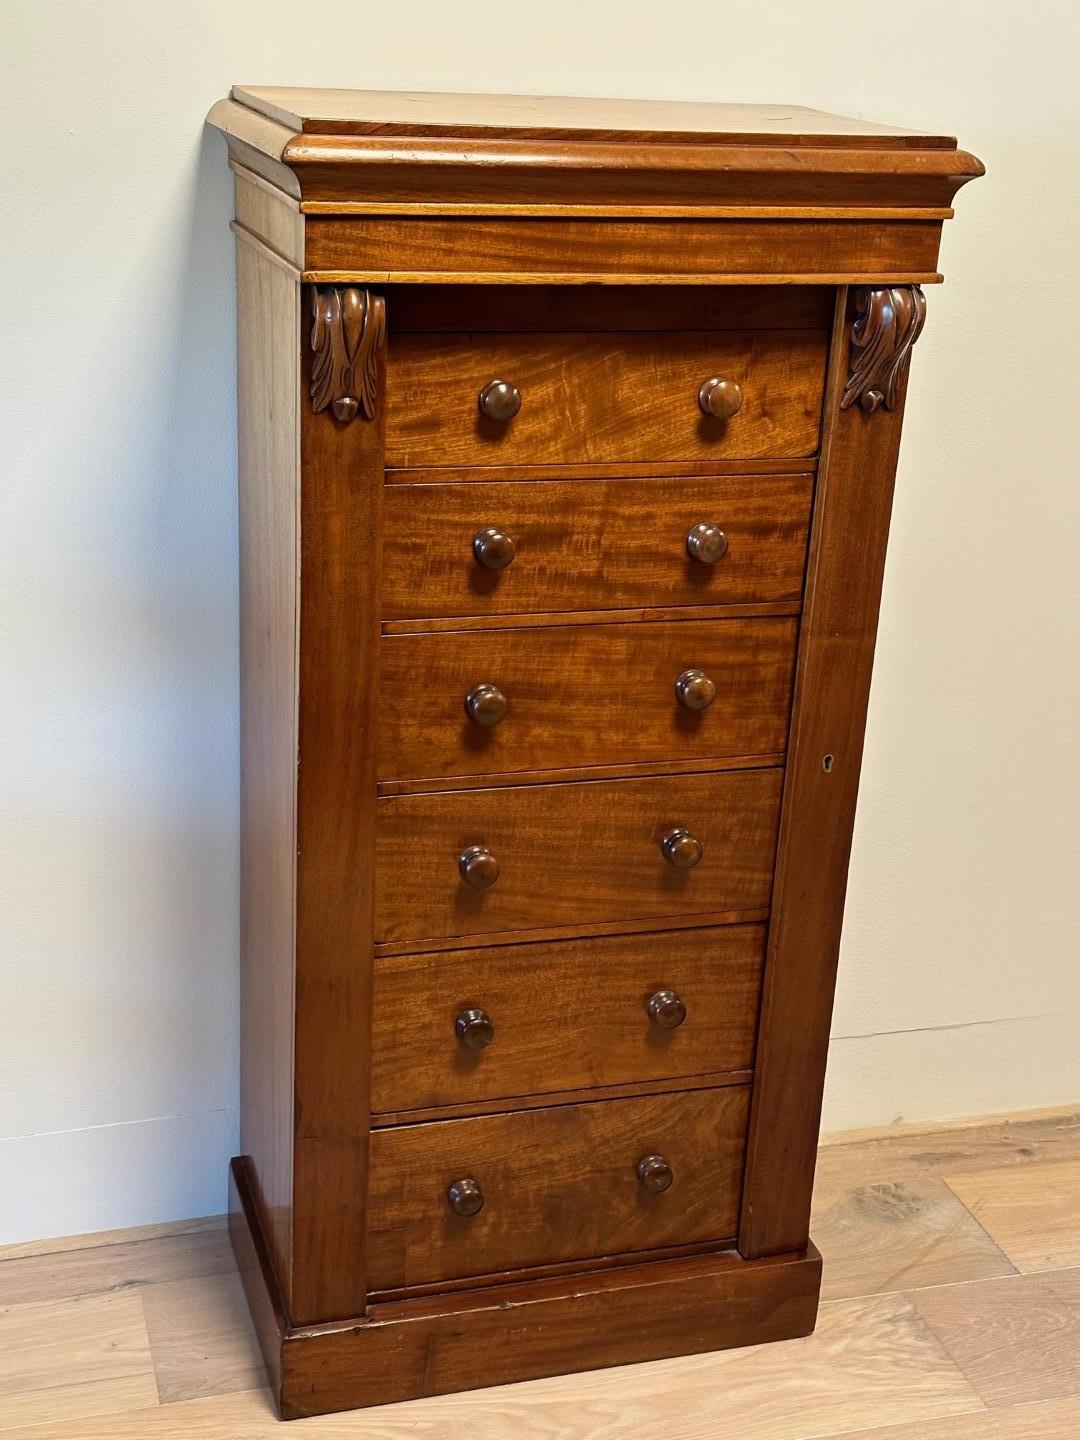 Here we have an antique English mahogany Wellington chest of drawers. In a beautiful original condition with a warm color. With its graceful design, rich mahogany wood and characteristic shape, this chest of drawers is not only a practical storage